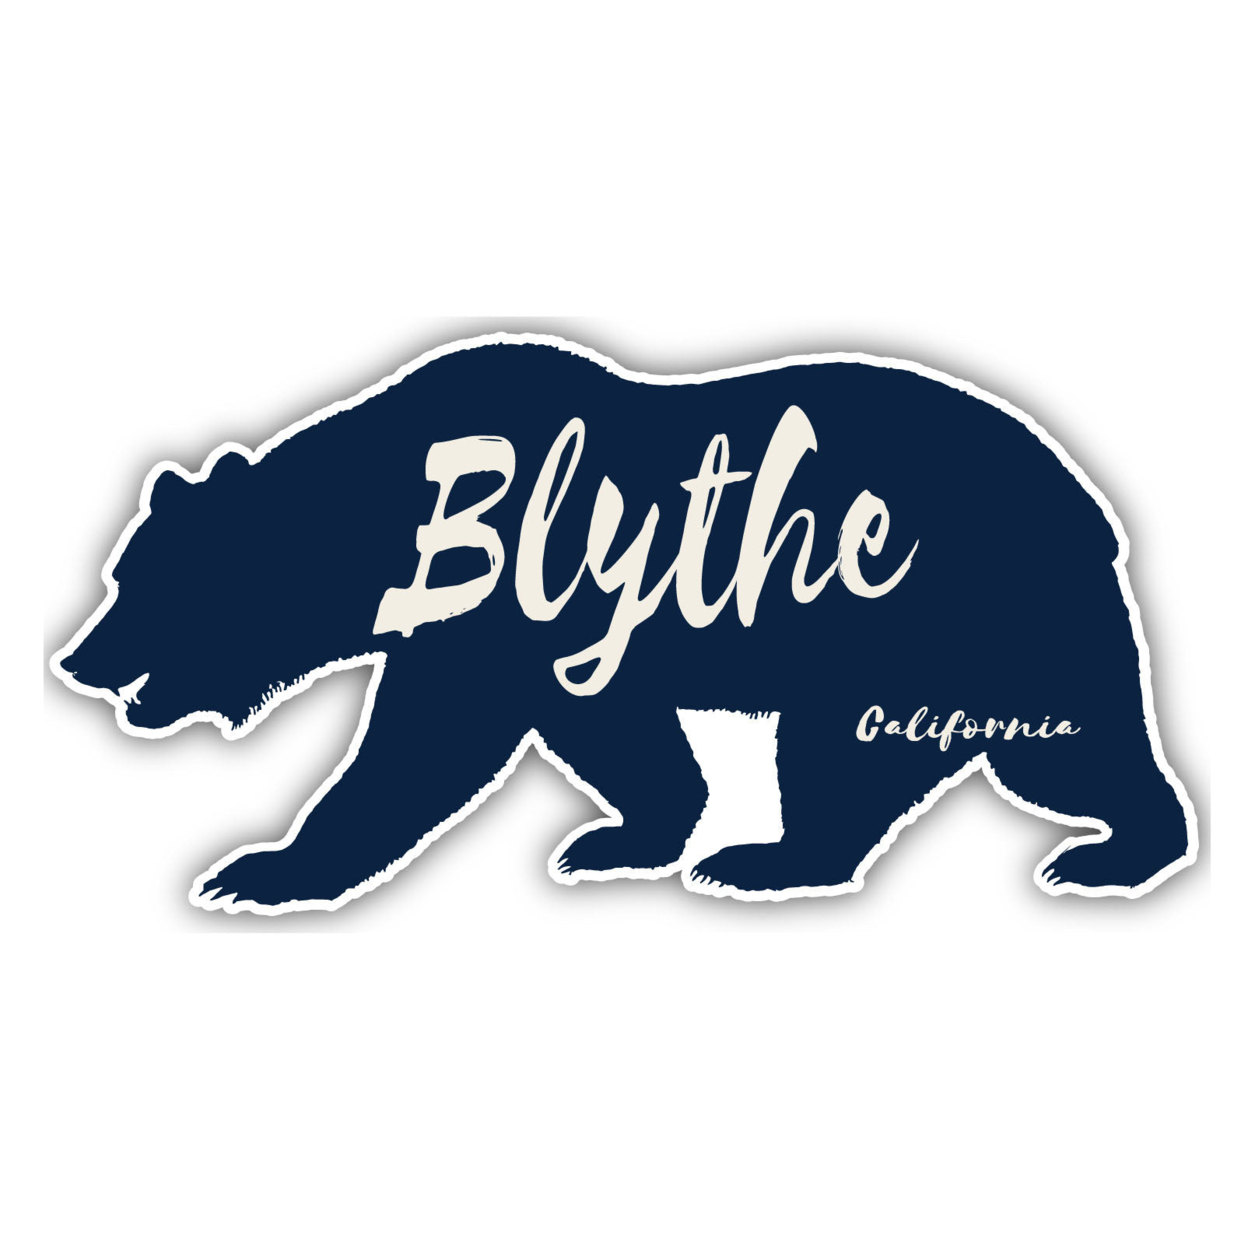 Blythe California Souvenir Decorative Stickers (Choose Theme And Size) - 4-Pack, 10-Inch, Great Outdoors